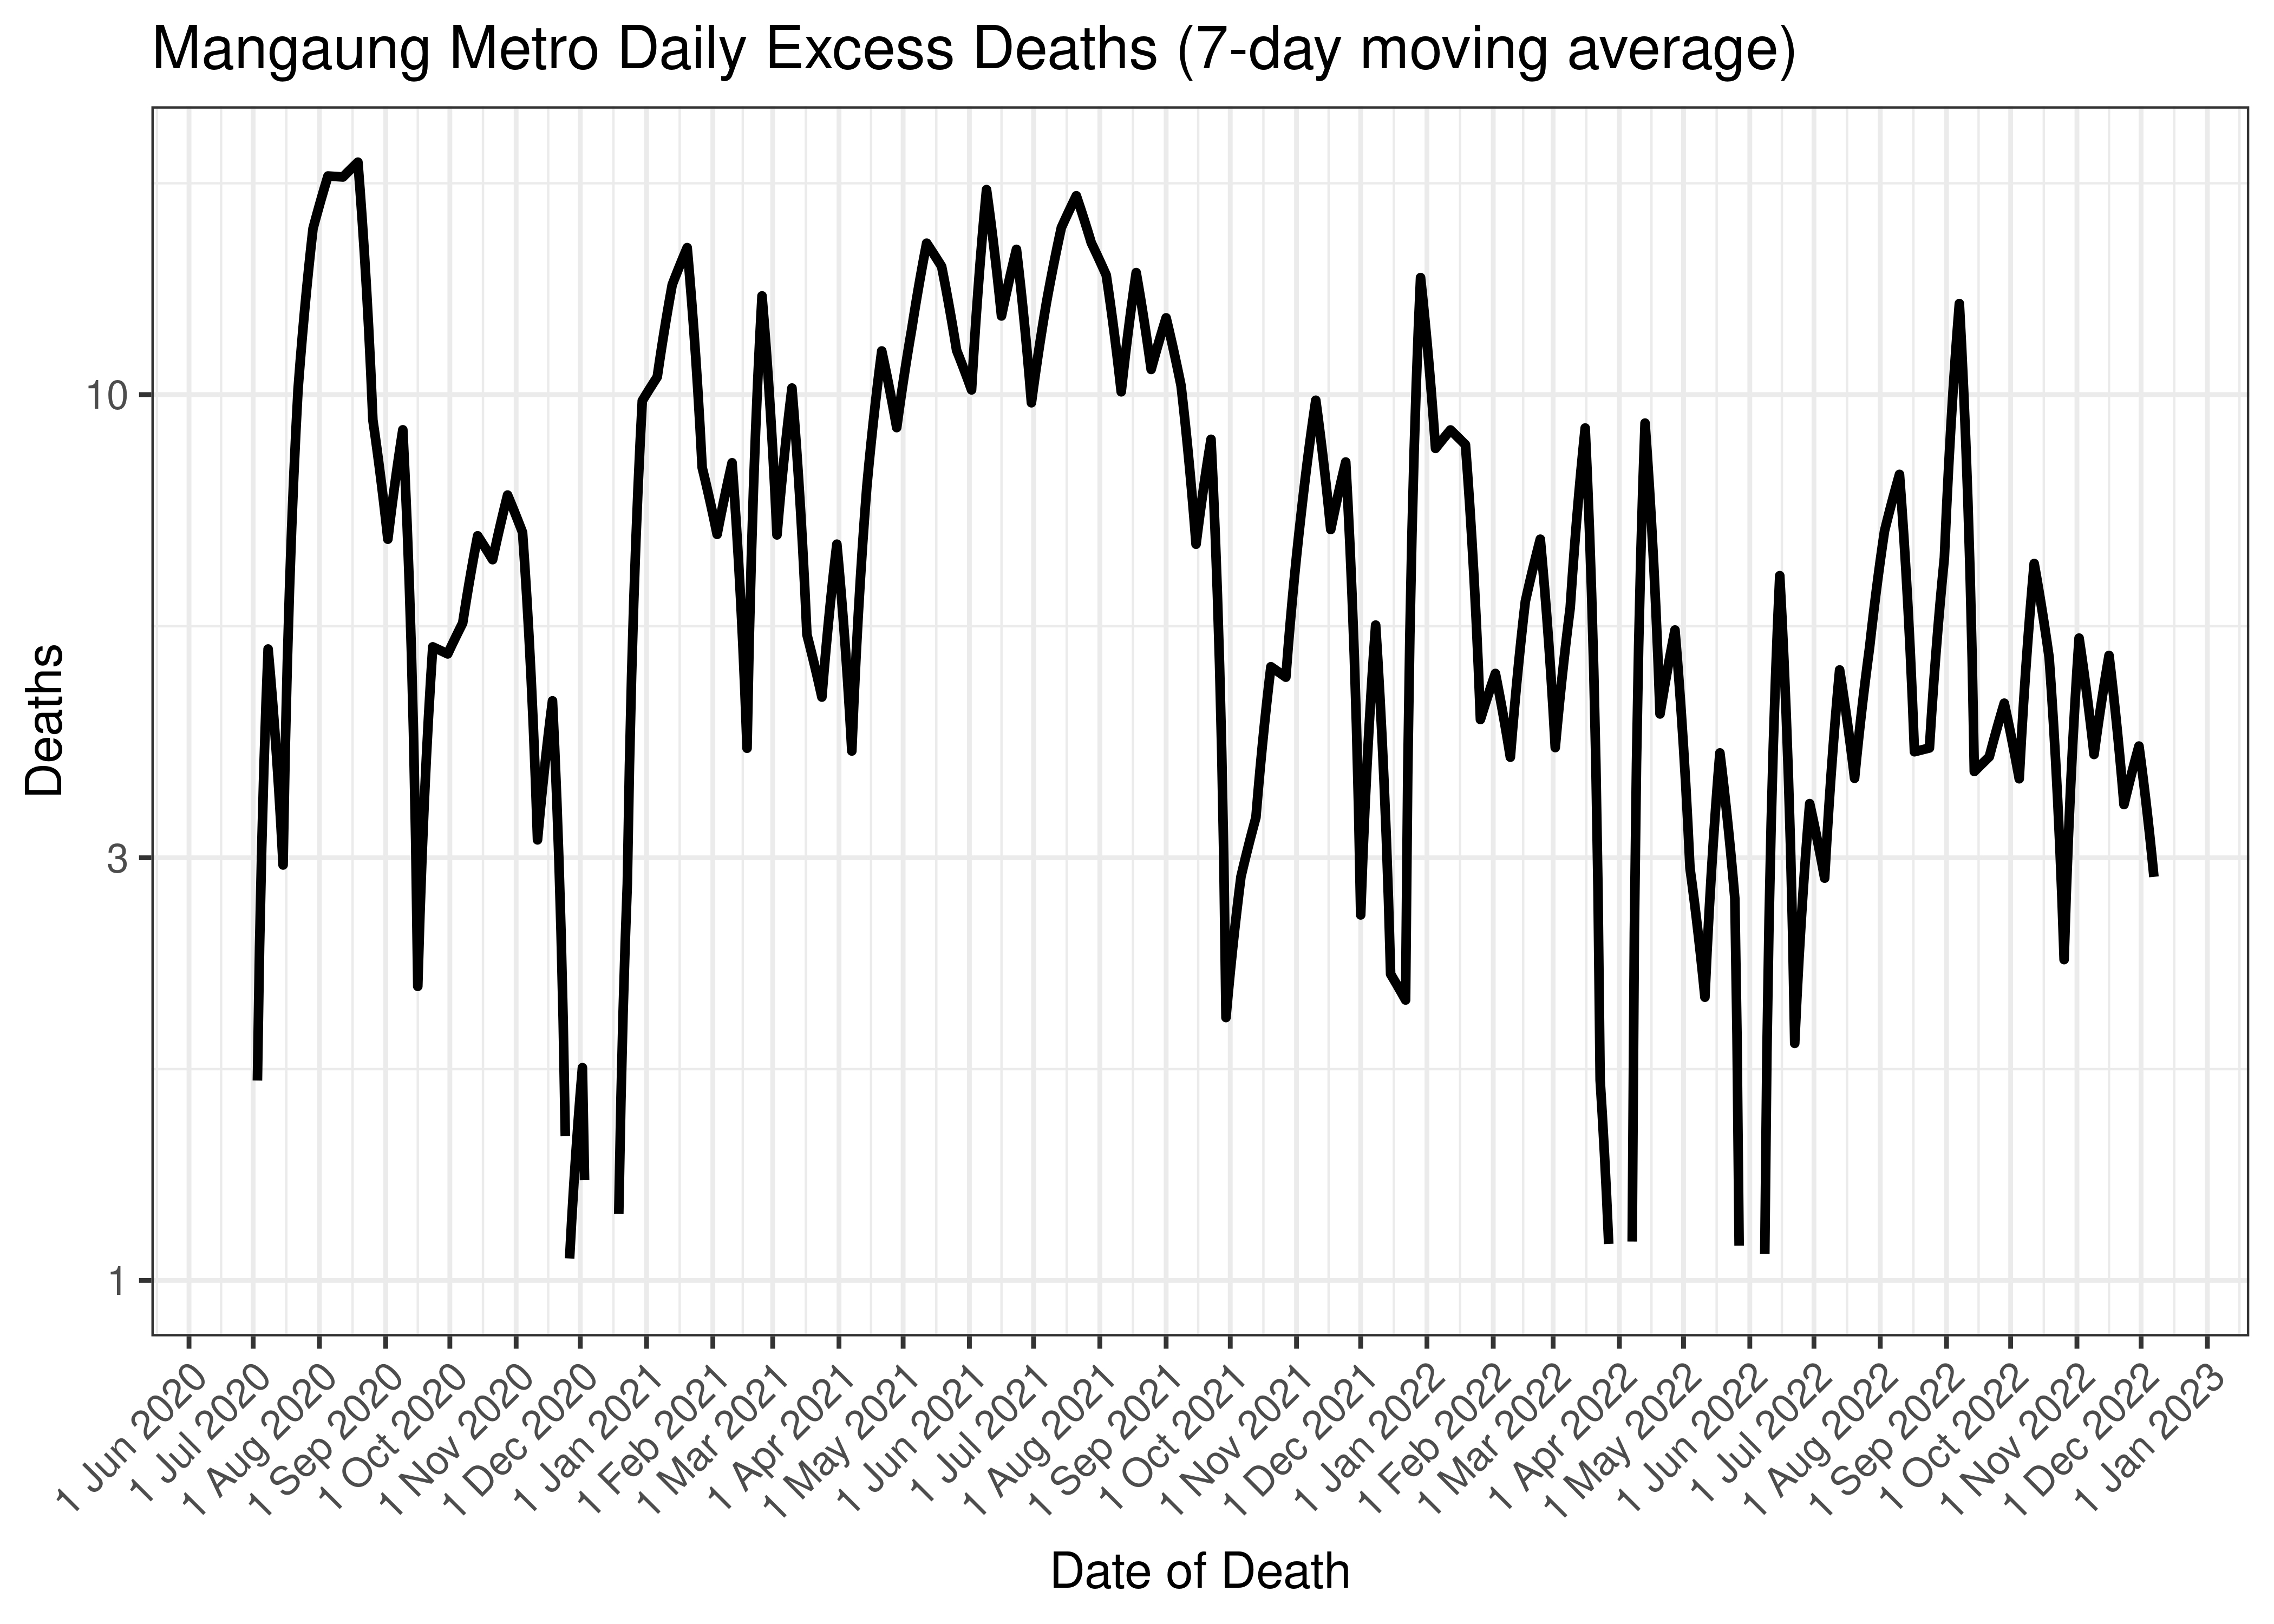 Mangaung Metro Daily Excess Deaths (7-day moving average)